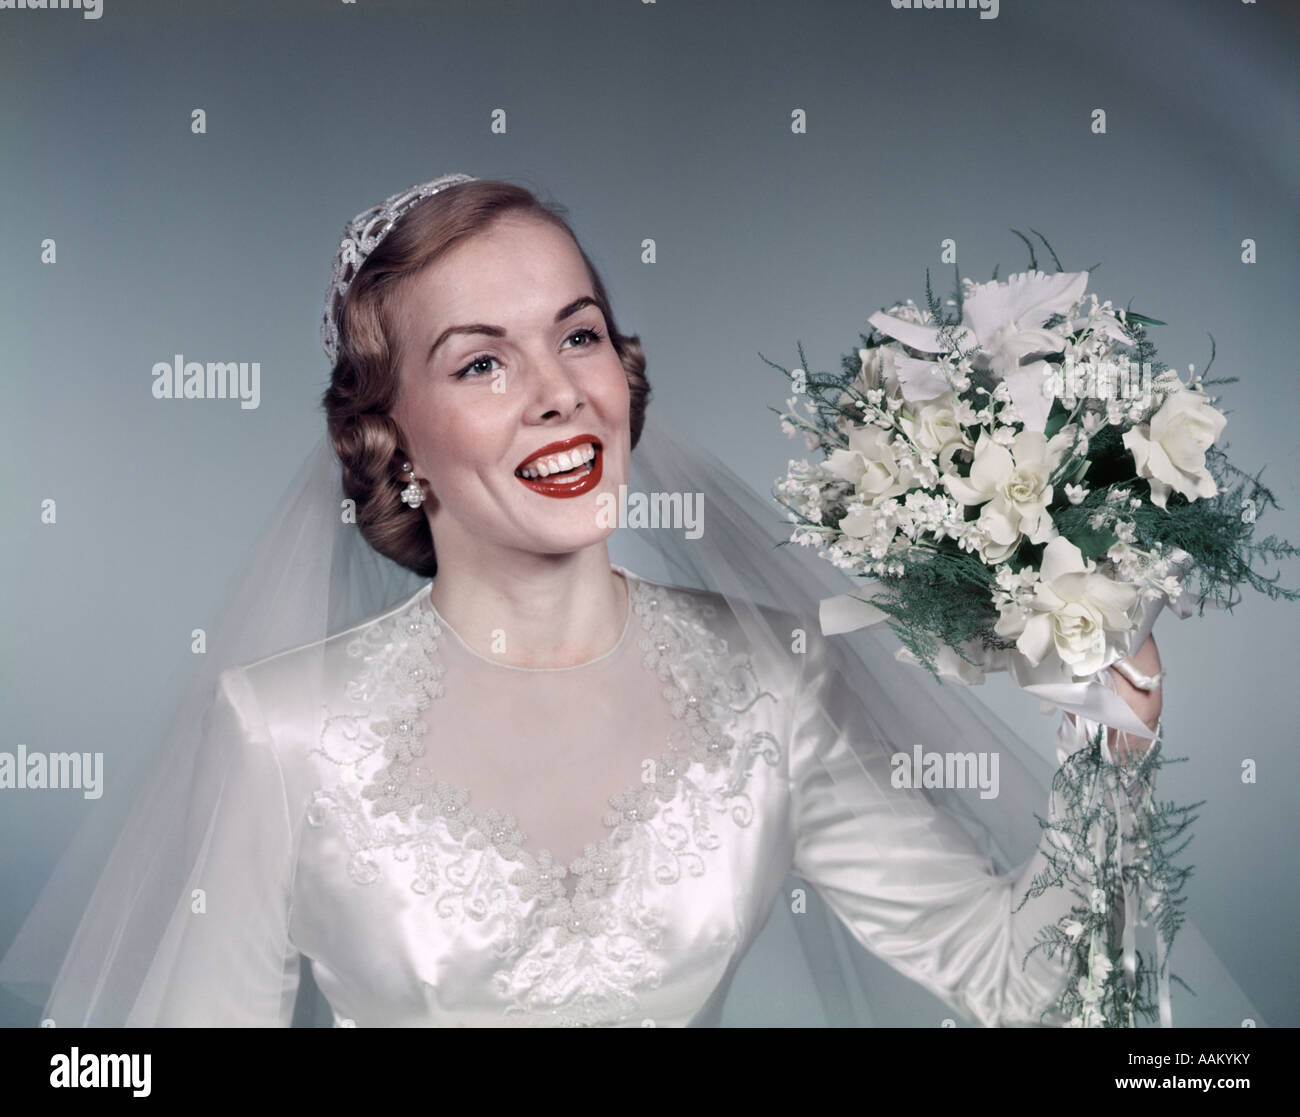 1950s BLOND BRIDE SMILING HOLDING ABOUT ...